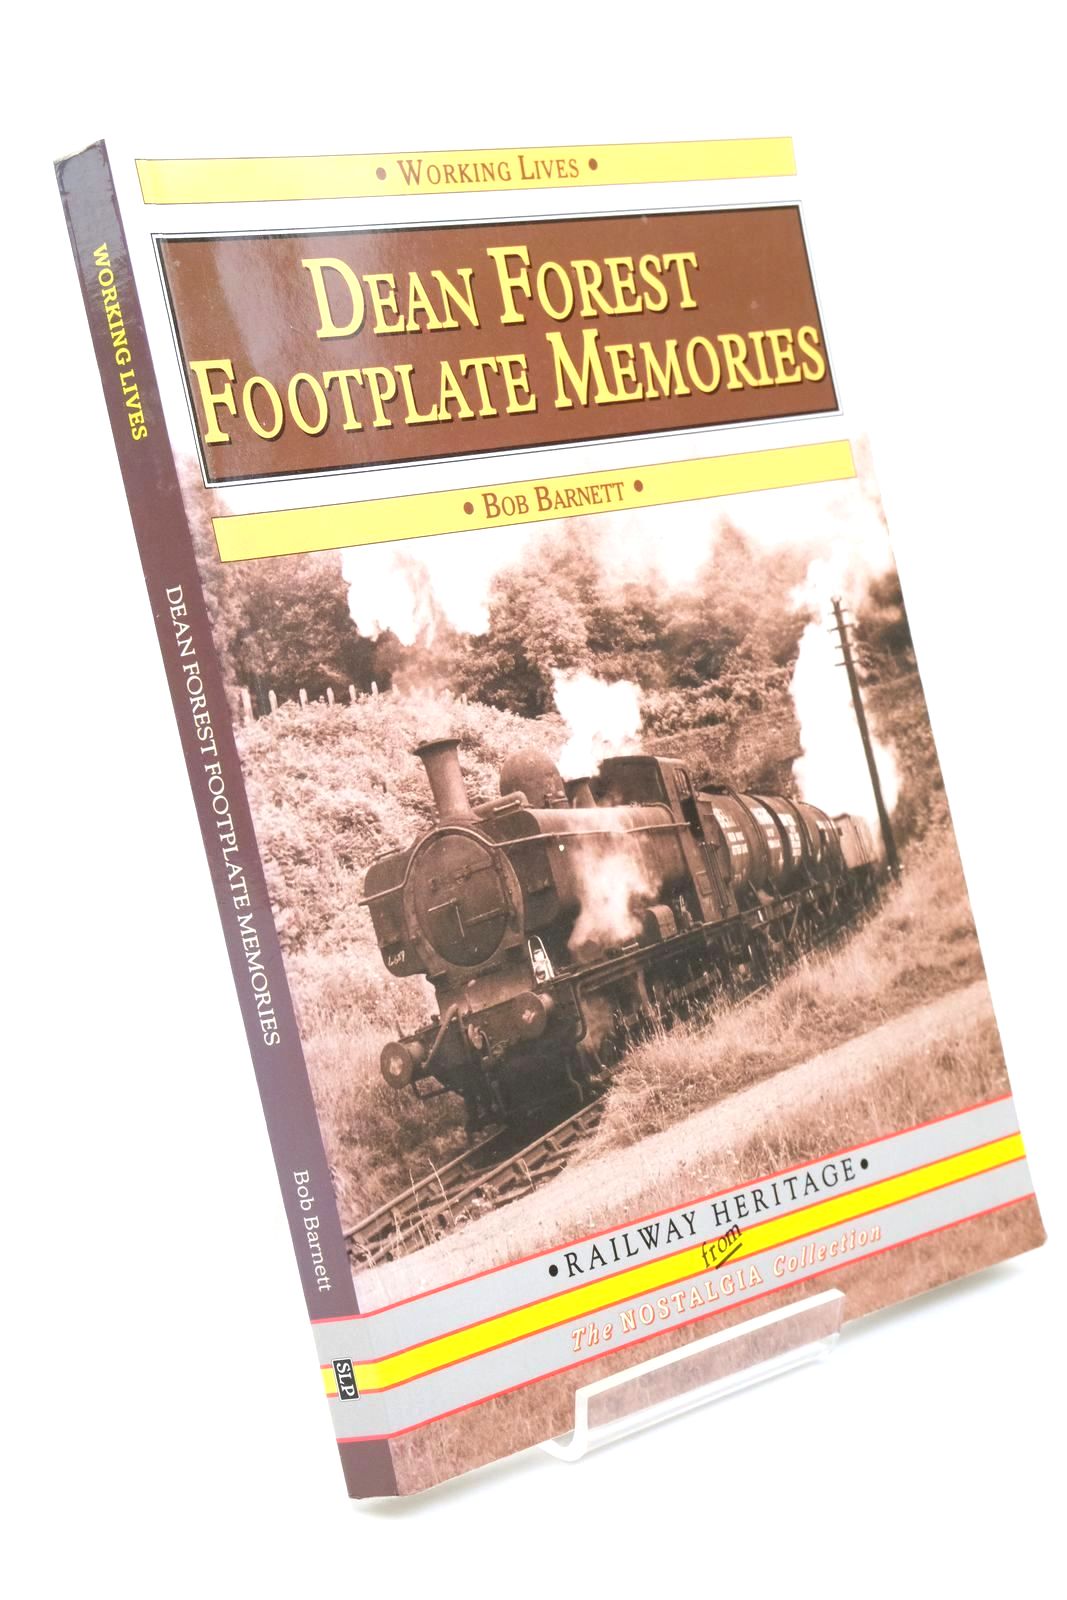 Photo of DEAN FOREST FOOTPLATE MEMORIES written by Barnett, Bob published by Silver Link Publishing (STOCK CODE: 1322807)  for sale by Stella & Rose's Books